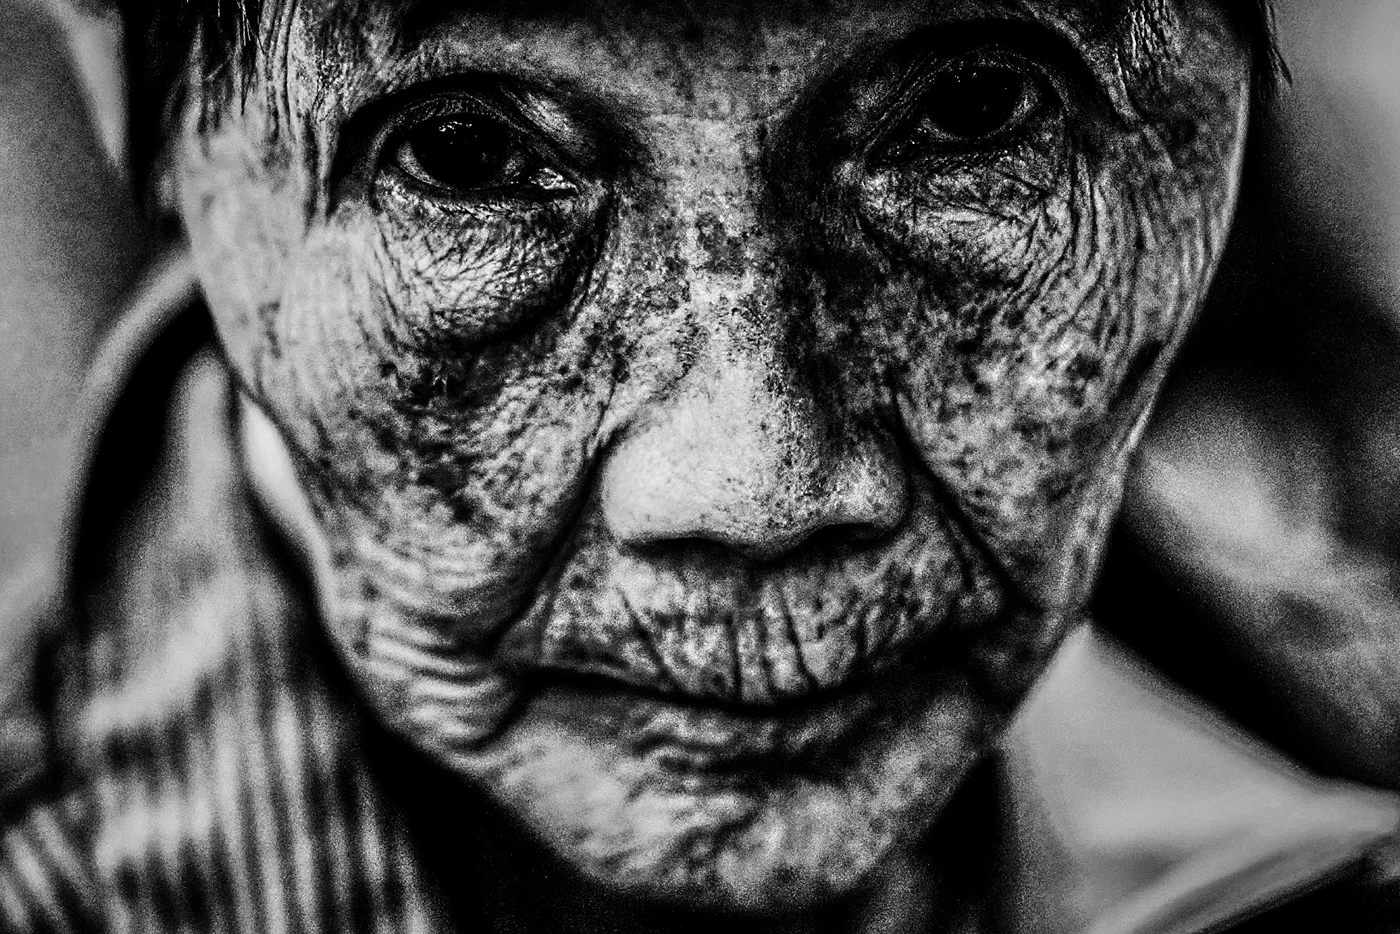 street photography portraits people asia black and white old people Street candid poor monks